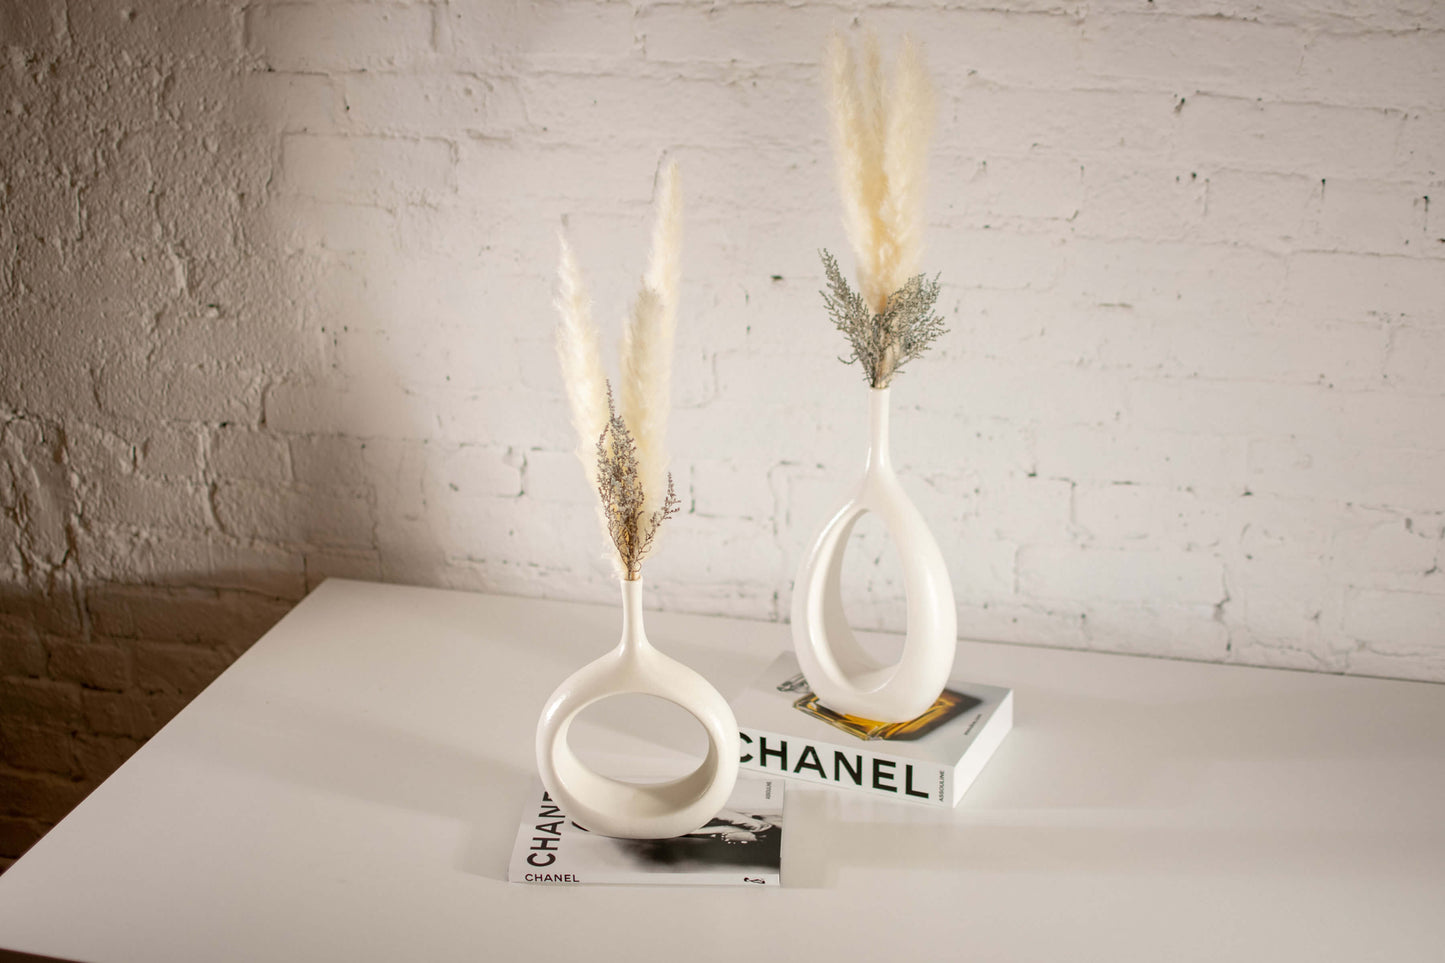 BOHEMIAN WHITE DOUBLE VASE WITH DRIED BUNNY TAILS